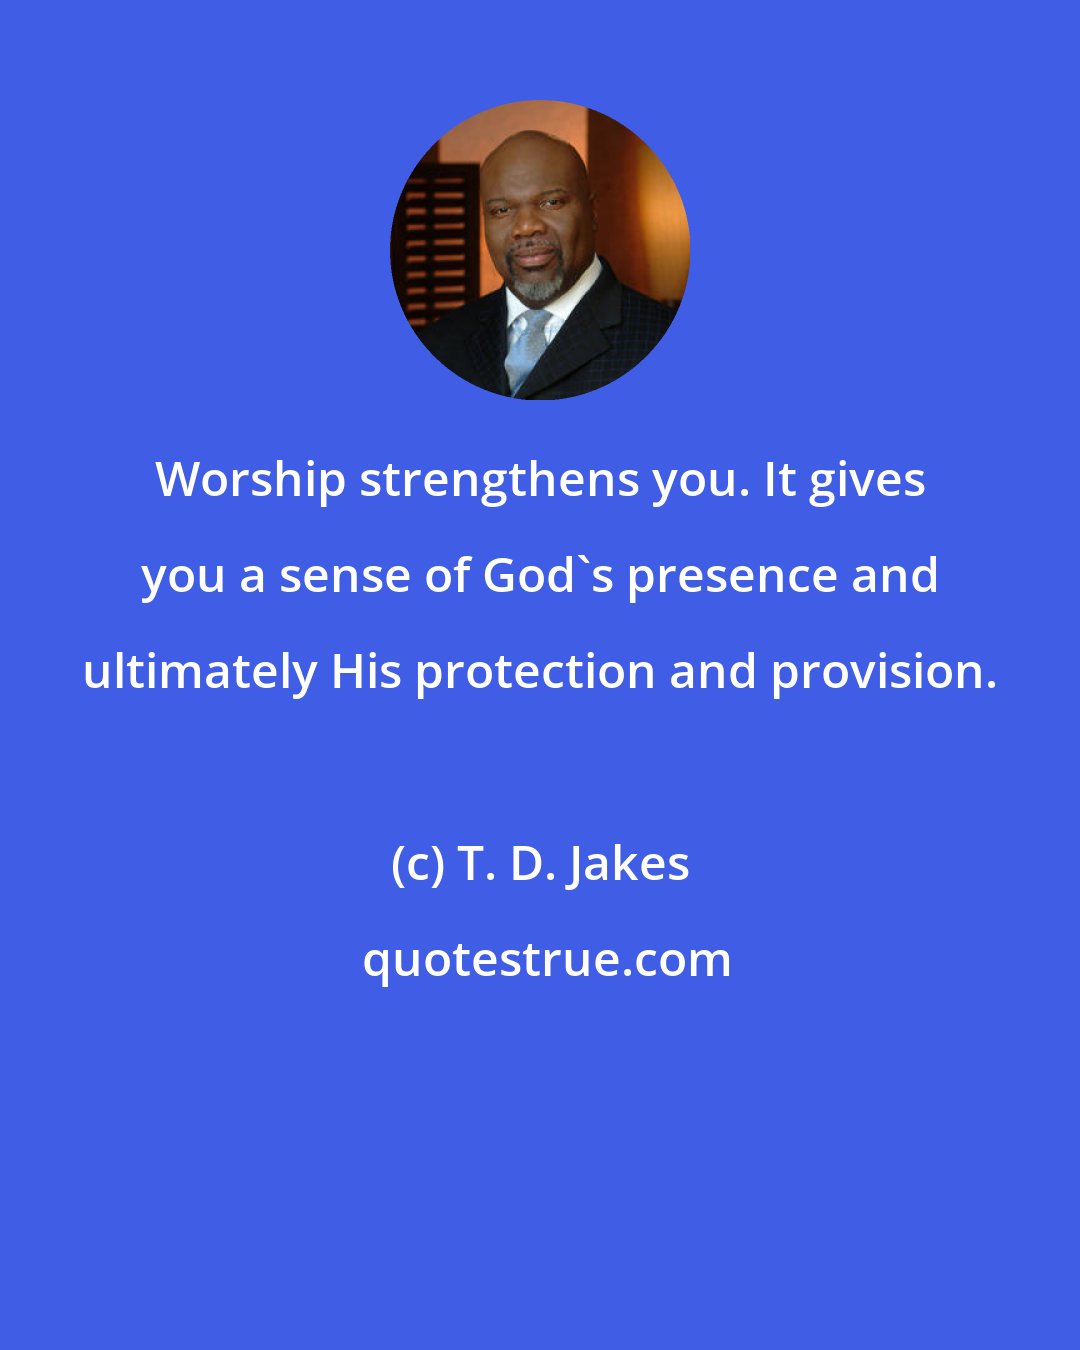 T. D. Jakes: Worship strengthens you. It gives you a sense of God's presence and ultimately His protection and provision.